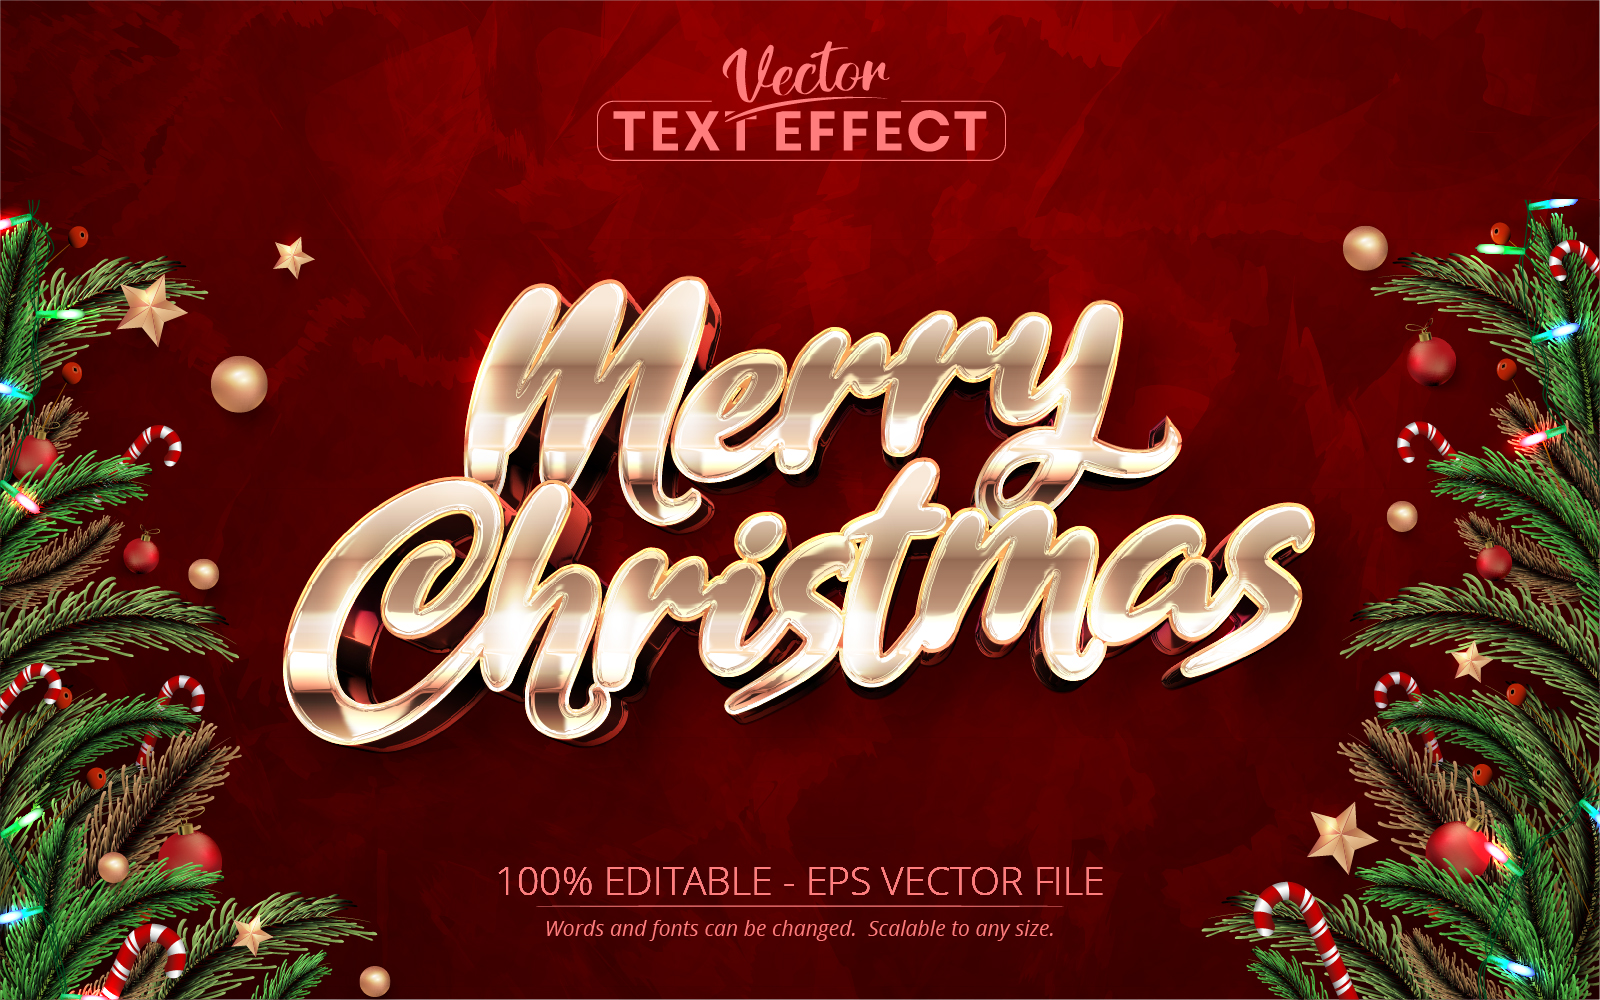 Merry Christmas - Metallic Gold Color, Editable Text Effect, Font Style, Graphics Illustration